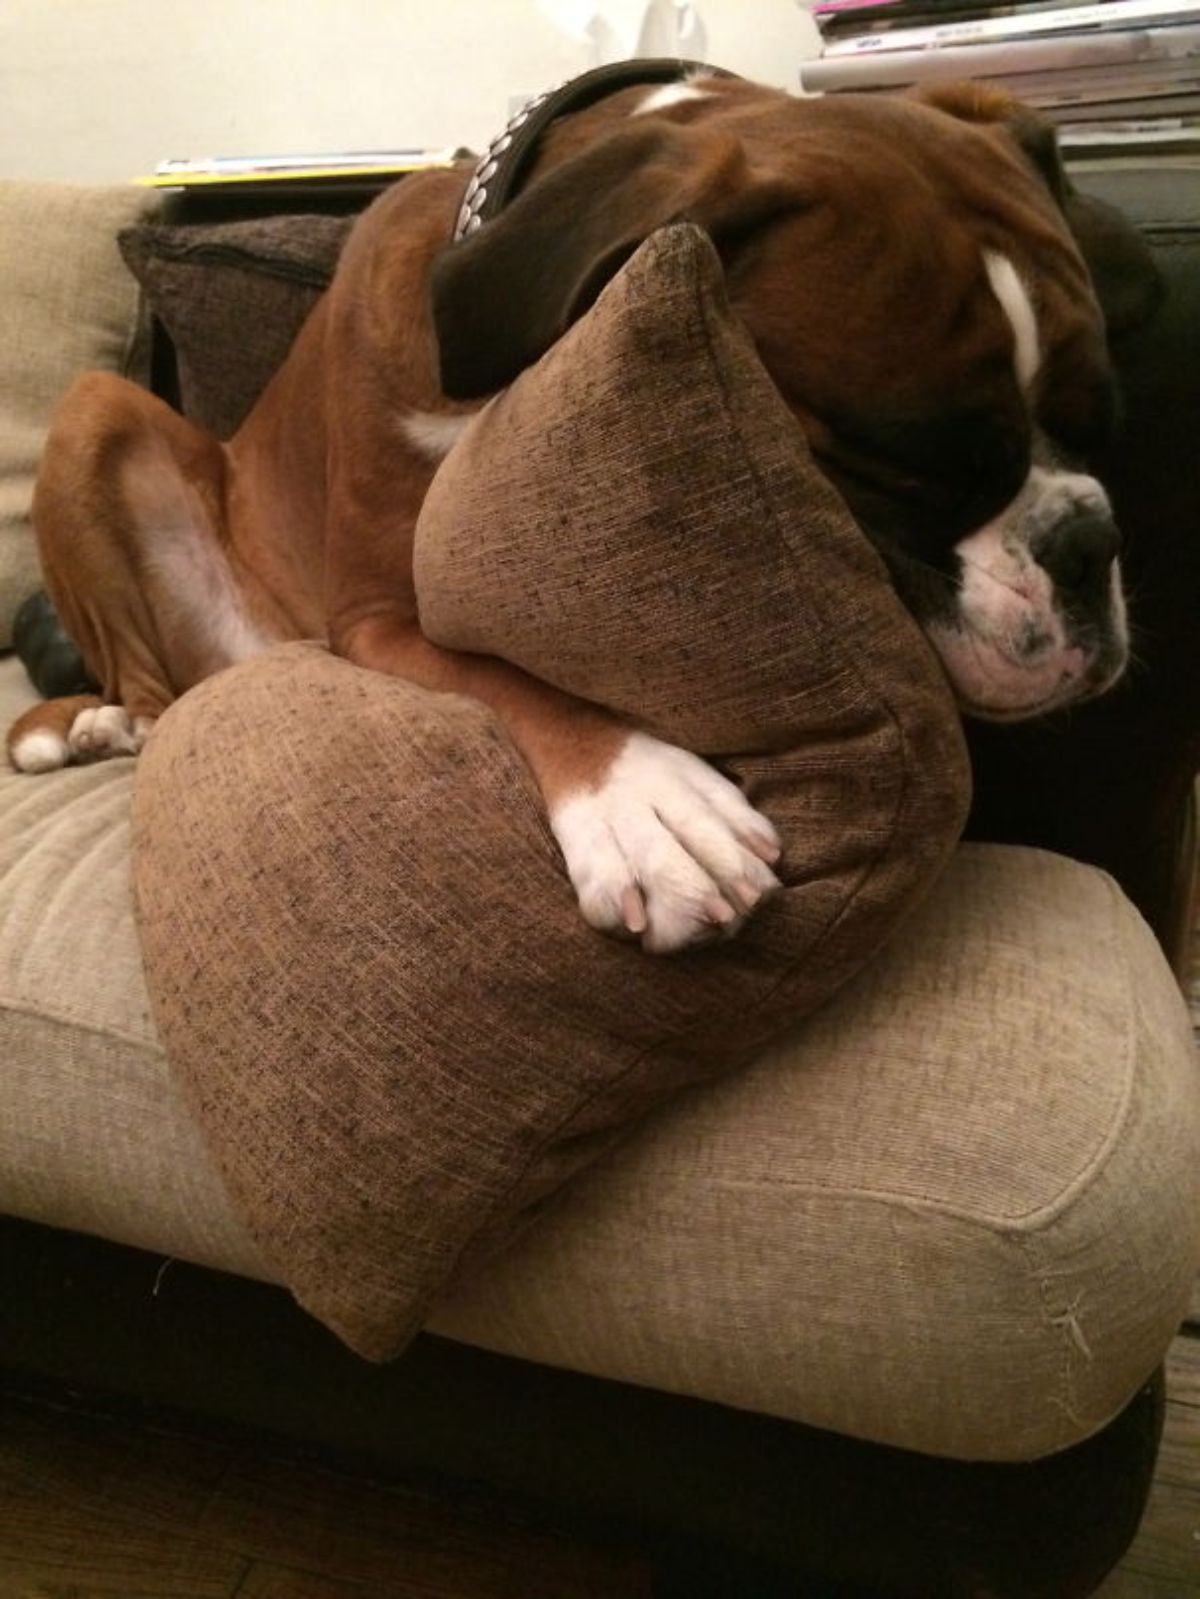 brown and white boxer laying on brown sofa holding a brown cushion against the face